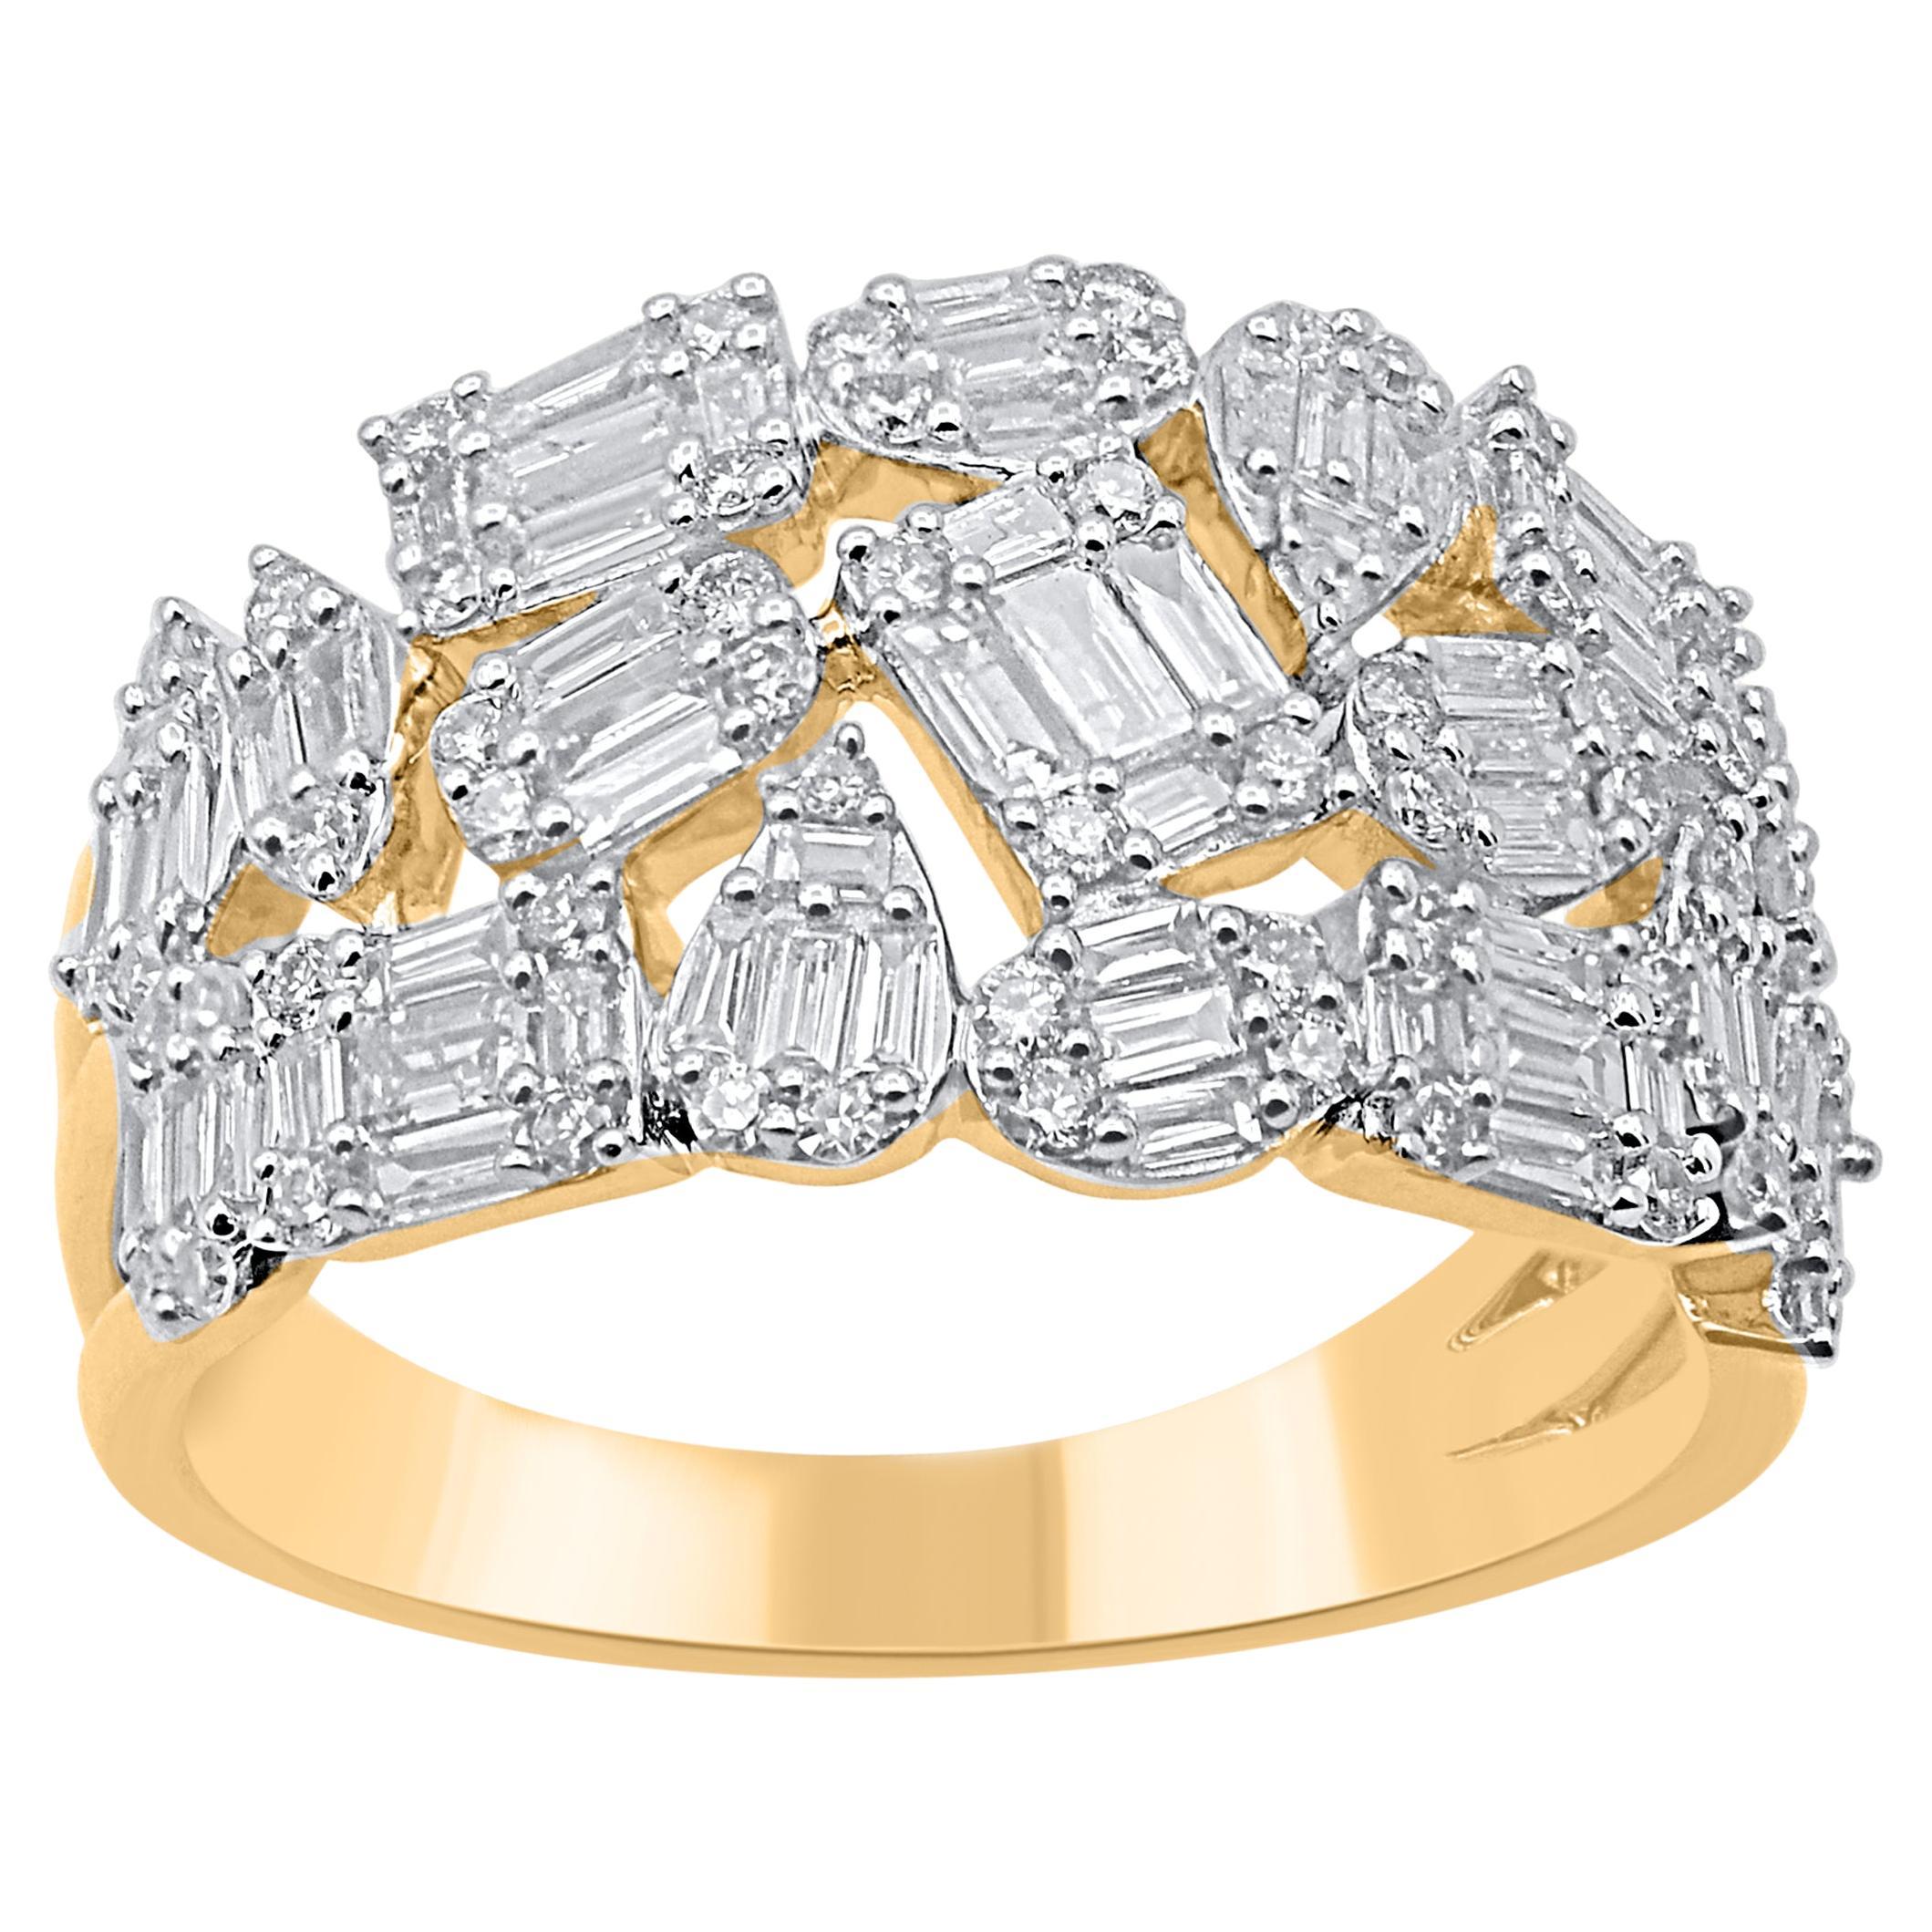 TJD 1.00 Carat Round and Baguette Diamond 14 Karat Yellow Gold Wedding Band Ring For Sale